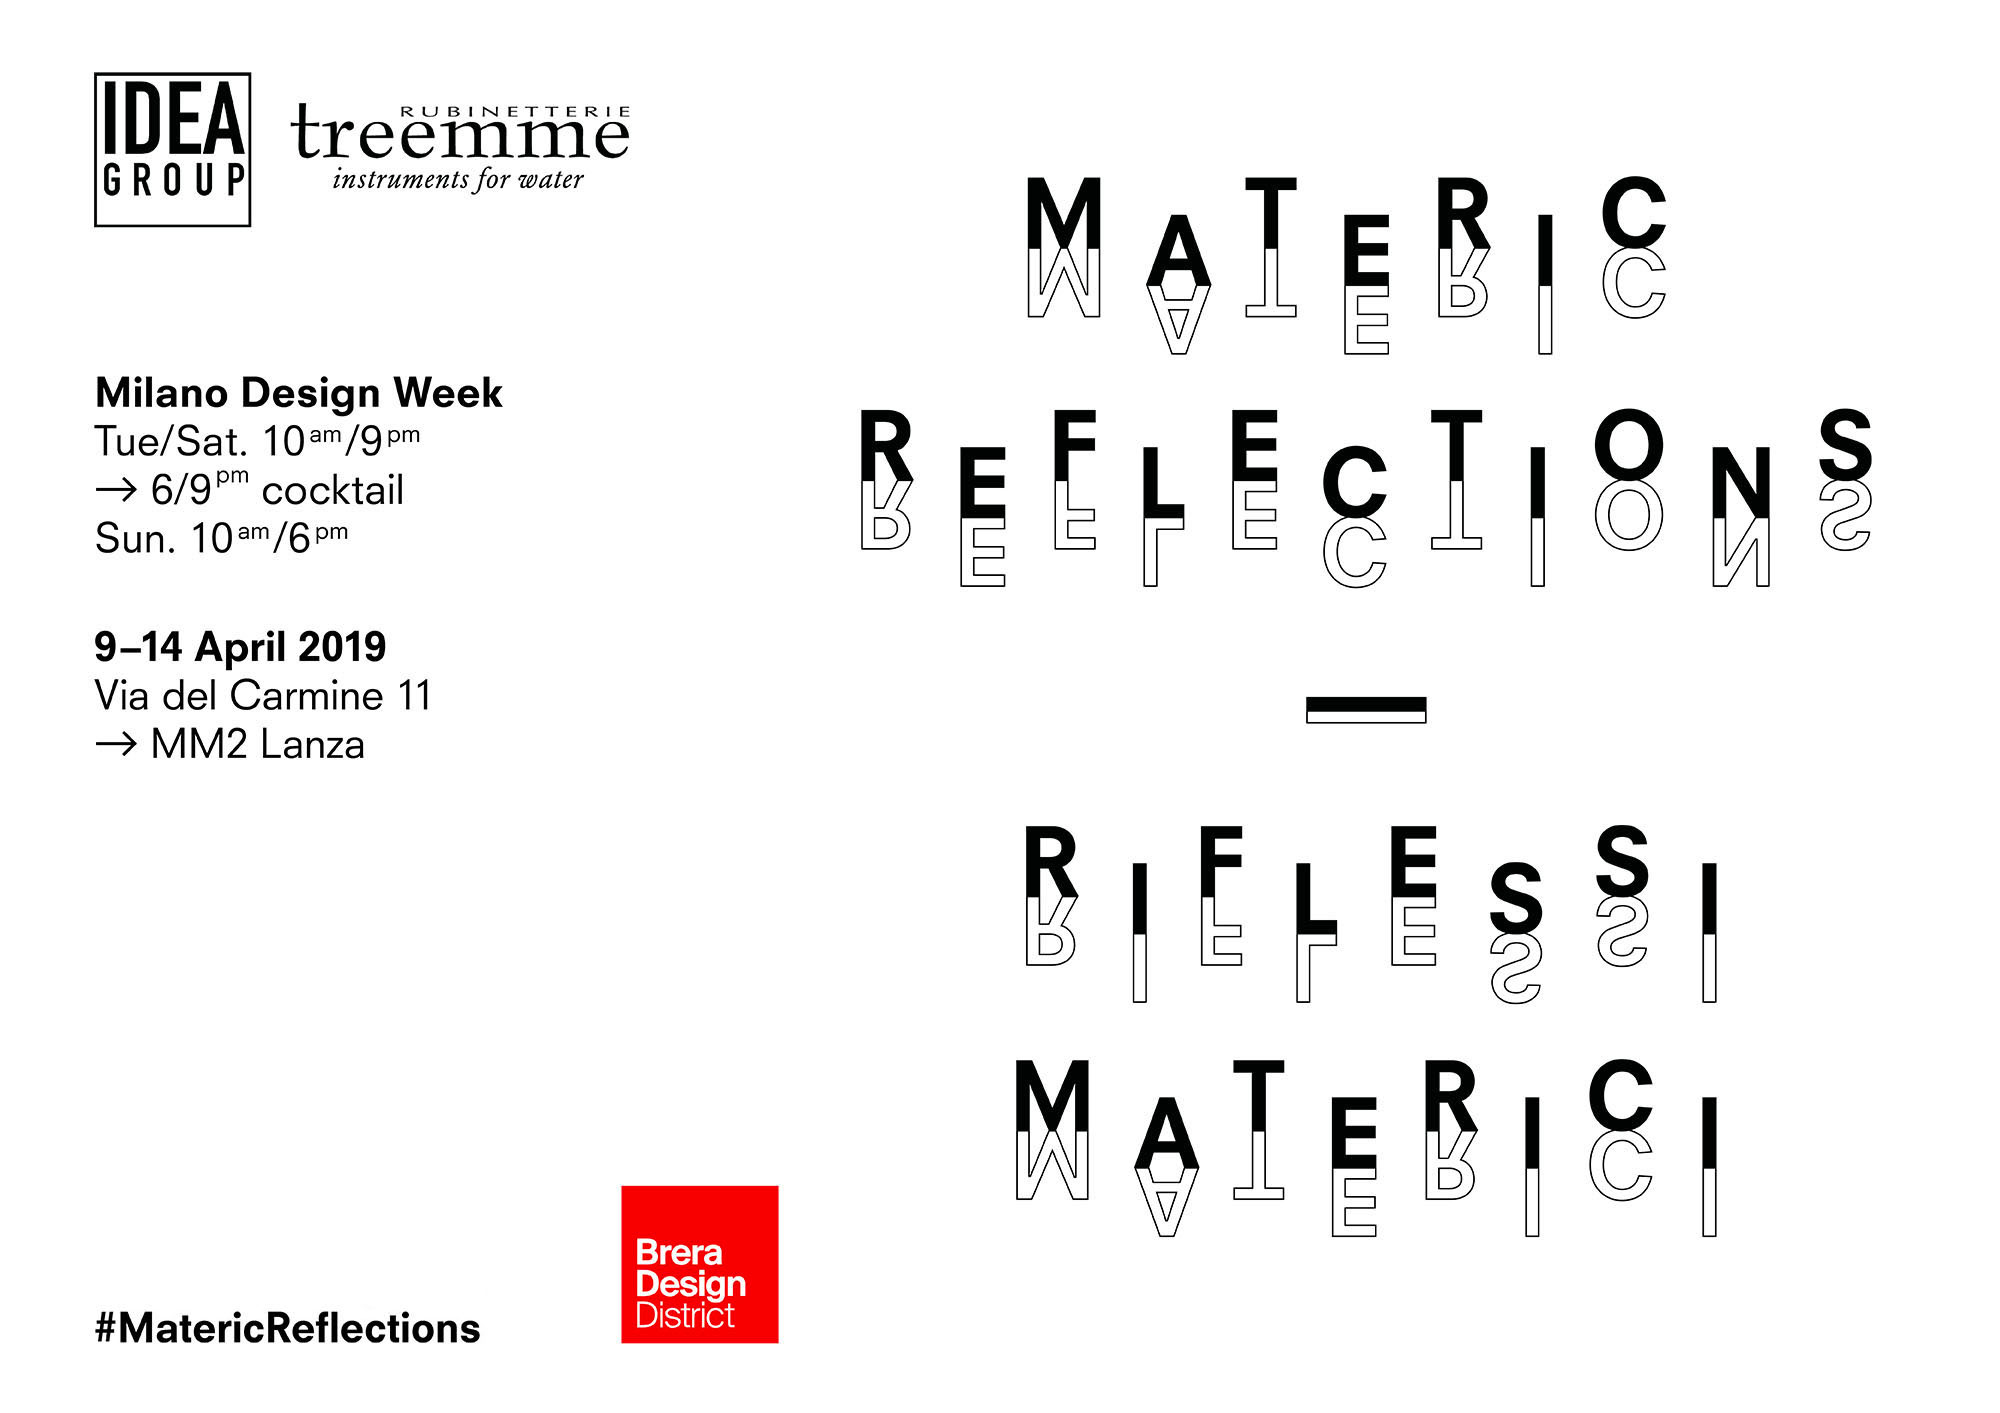 Materic Reflections: Ideagroup at Fuorisalone